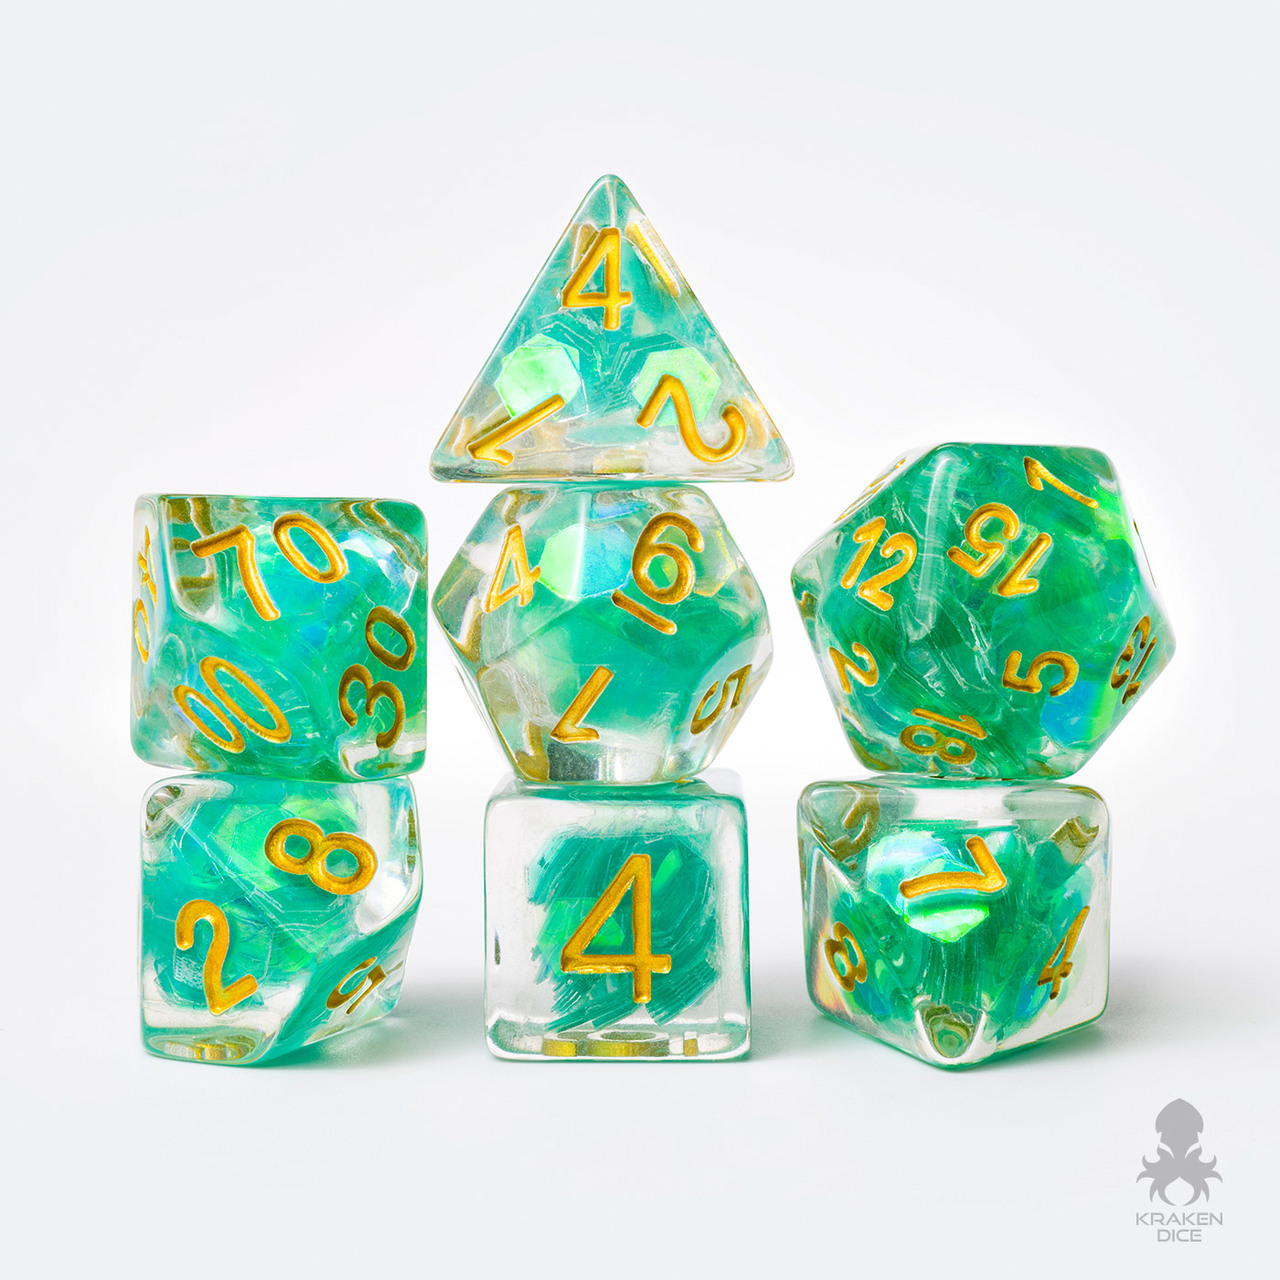 DND dice that are transparent with small green sequins inside.